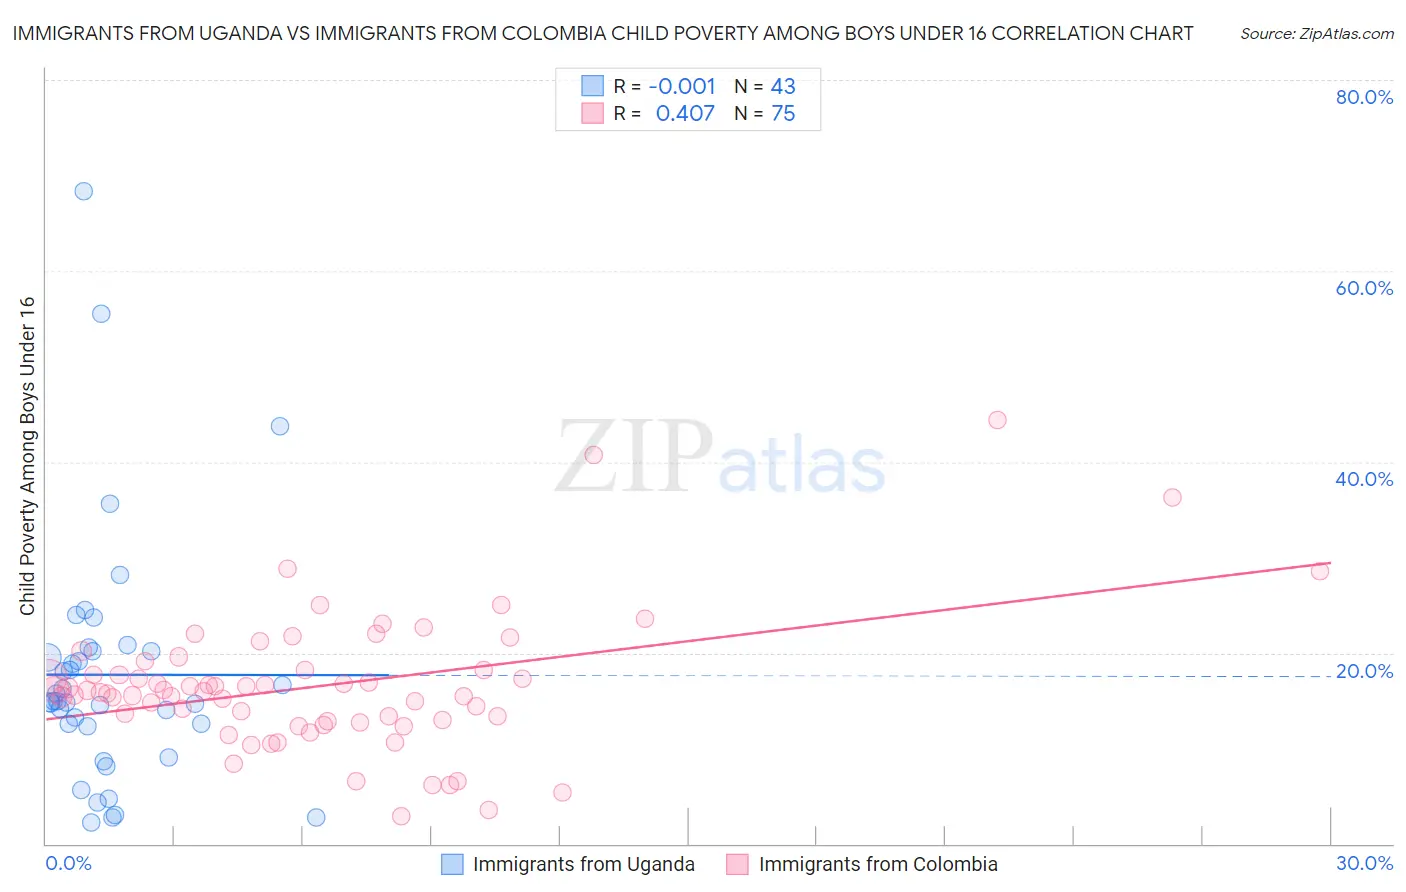 Immigrants from Uganda vs Immigrants from Colombia Child Poverty Among Boys Under 16